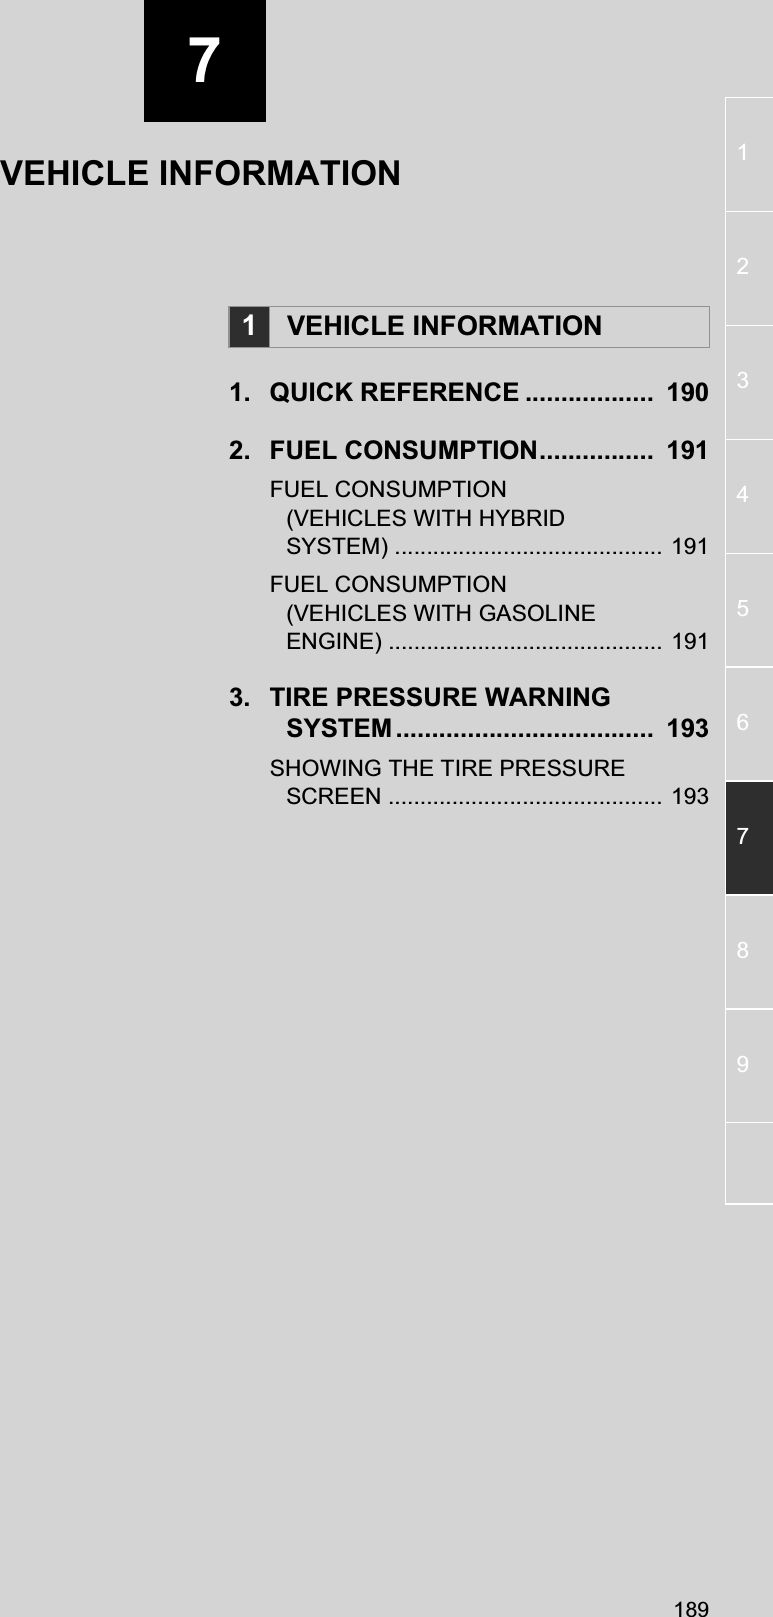 71891234567891. QUICK REFERENCE ..................  1902. FUEL CONSUMPTION................  191FUEL CONSUMPTION (VEHICLES WITH HYBRID SYSTEM) .......................................... 191FUEL CONSUMPTION (VEHICLES WITH GASOLINE ENGINE) ........................................... 1913. TIRE PRESSURE WARNING SYSTEM....................................  193SHOWING THE TIRE PRESSURE SCREEN ........................................... 1931VEHICLE INFORMATIONVEHICLE INFORMATION